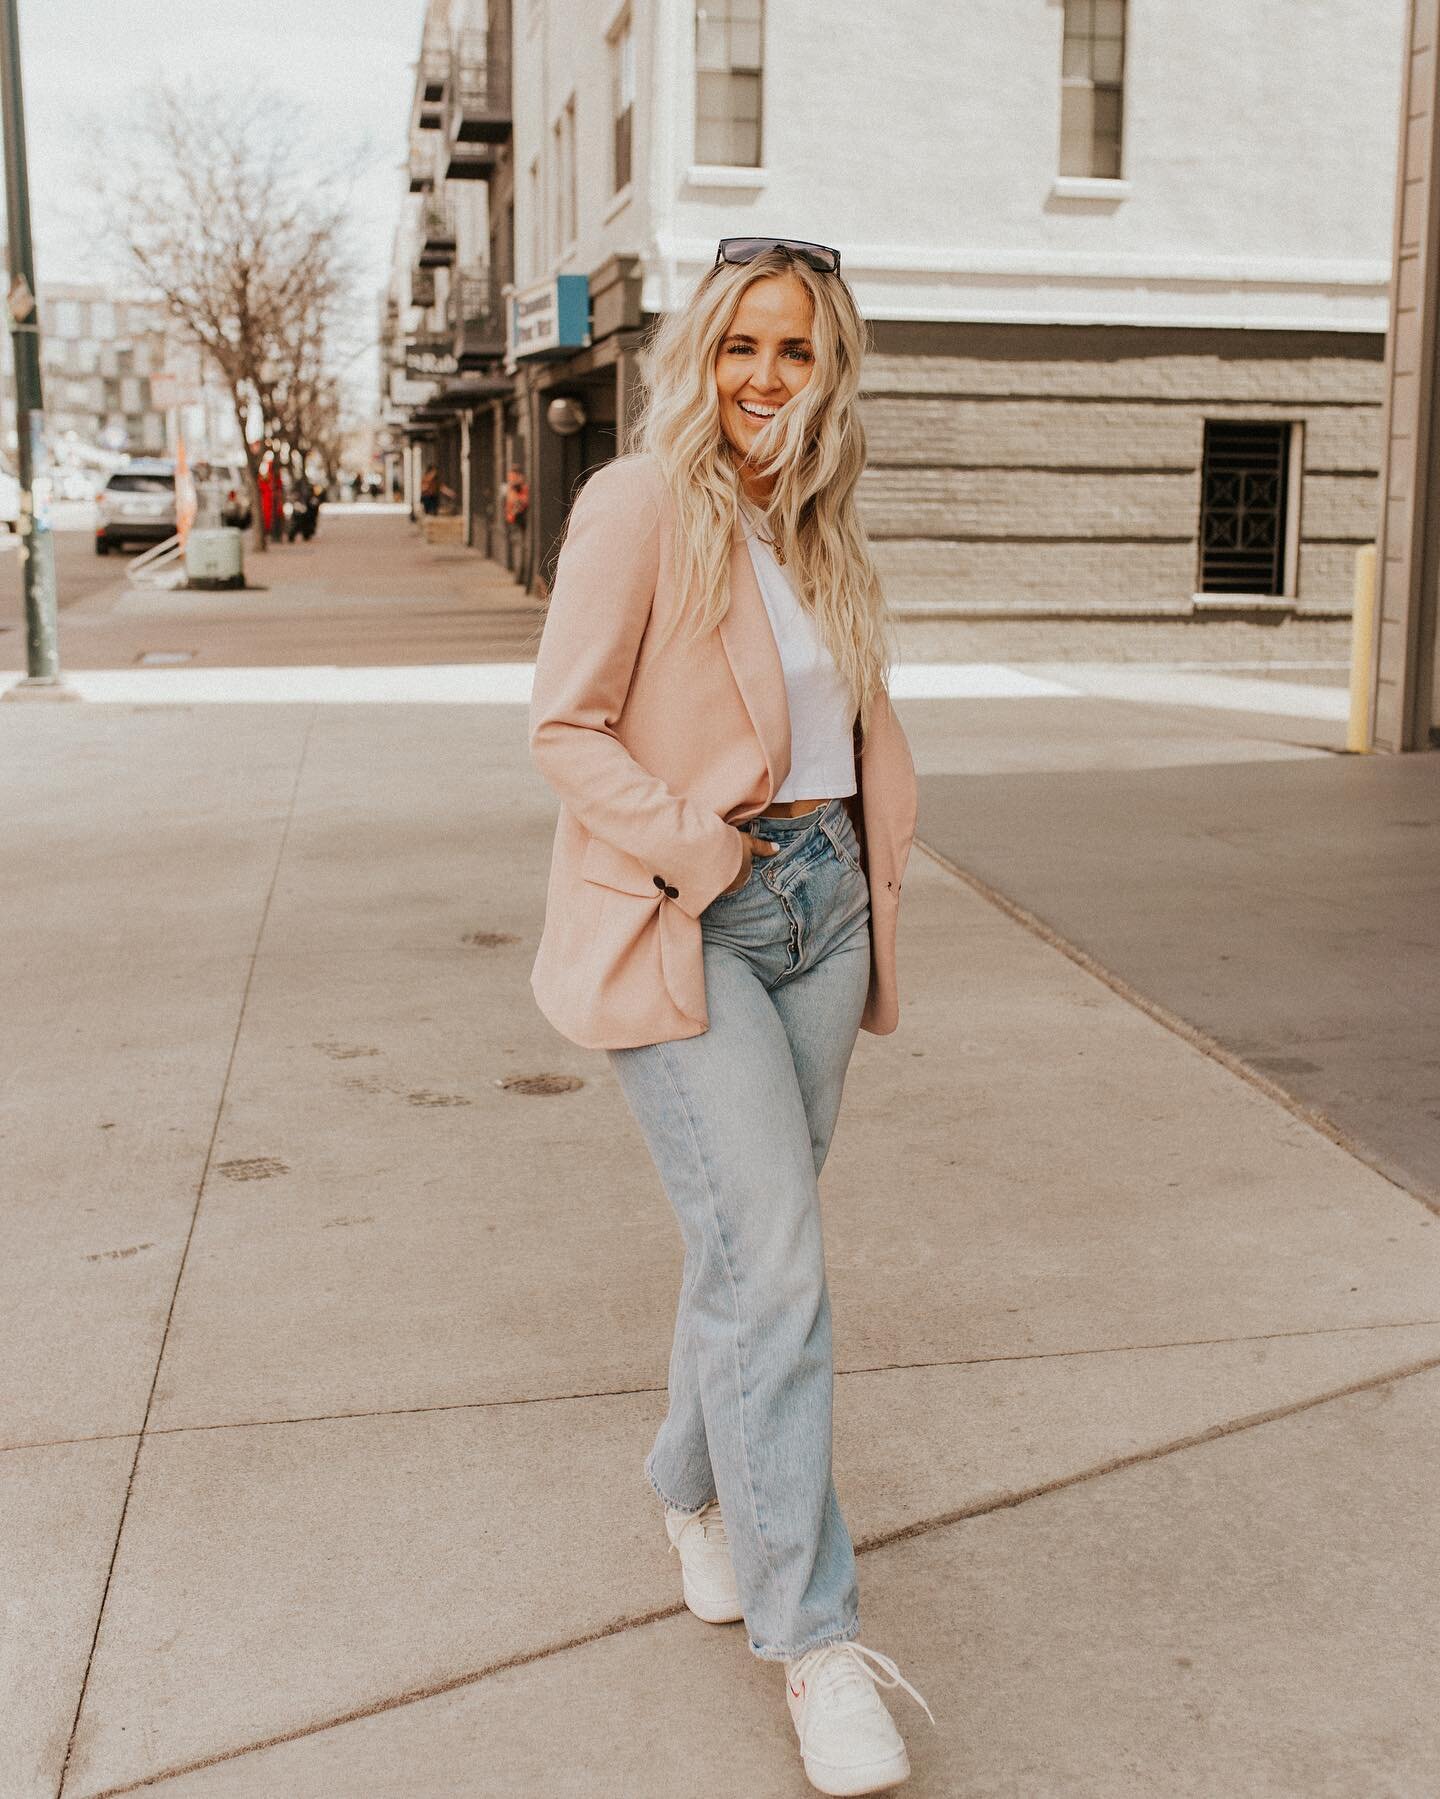 Not 100% sure why, but when I look at these photos of @cassidyeats, the only lyrics that come to mind are &ldquo;making my way downtown, walking fast, faces pass and I'm homebound.&rdquo; Na na na&hellip;.! 😍
&bull;
&bull;But for real, working with 